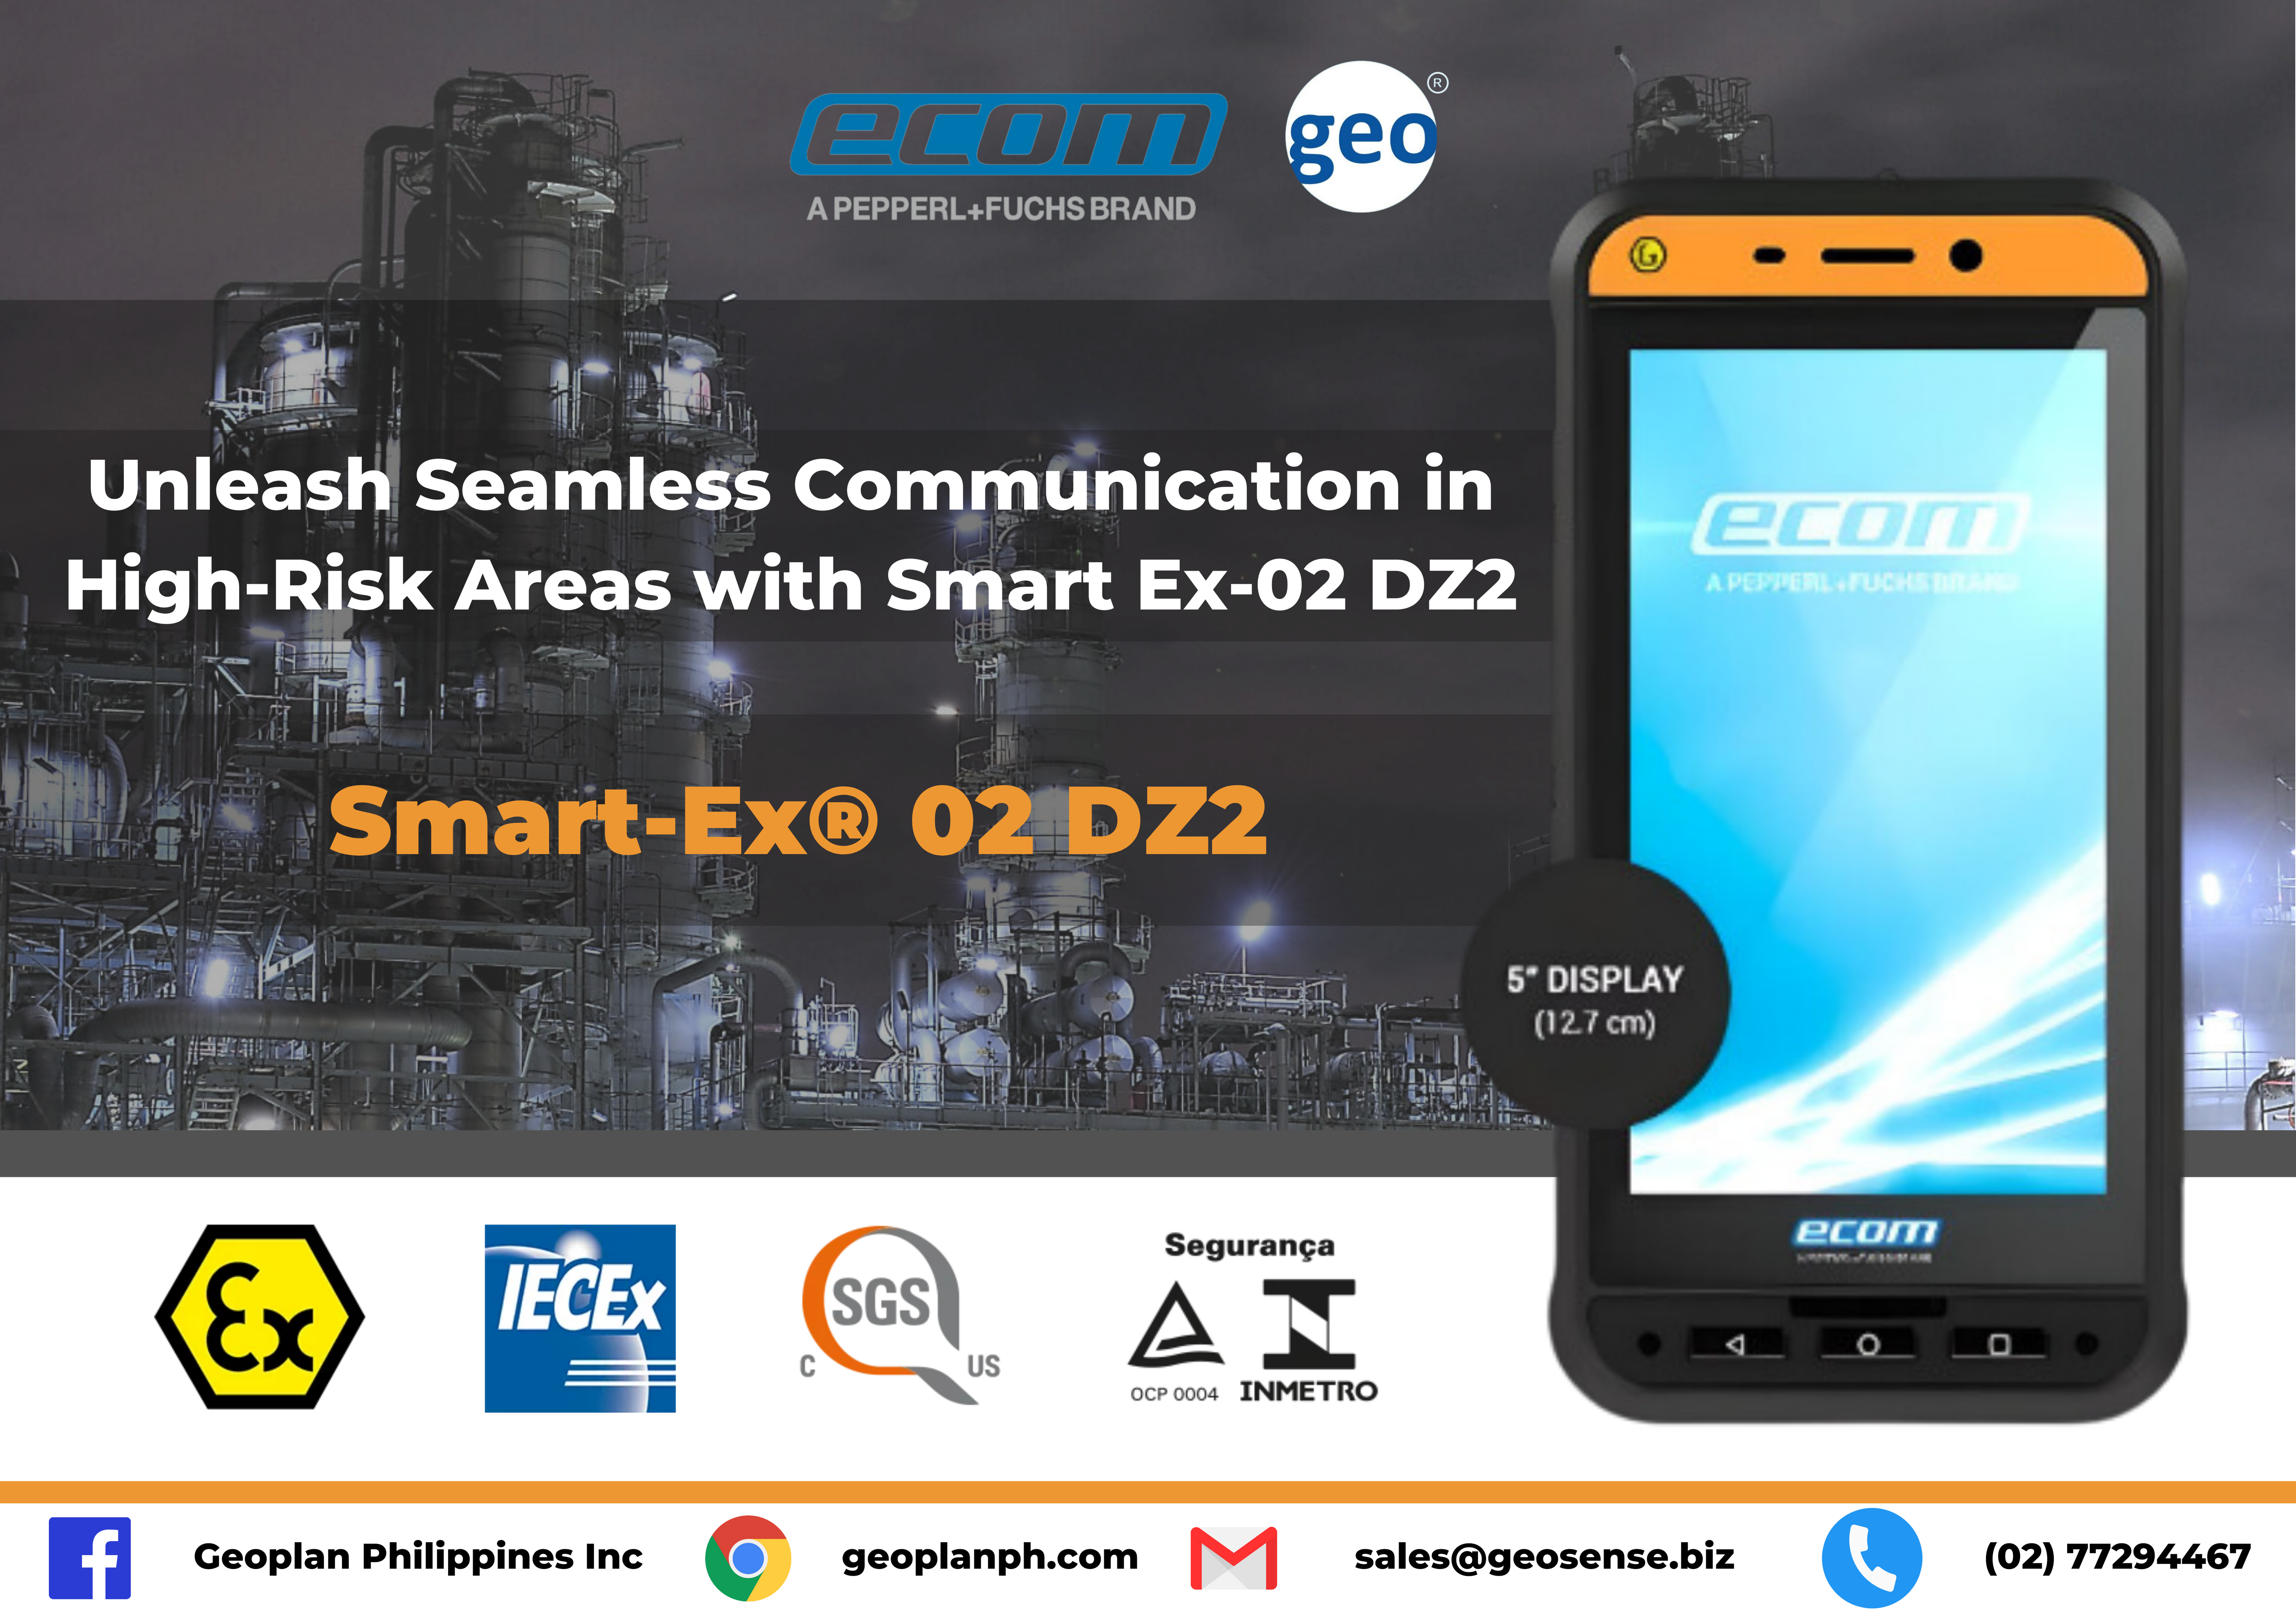 Ecom: Unleash Seamless Communication in High-Risk Areas with Smart Ex-02 DZ2.